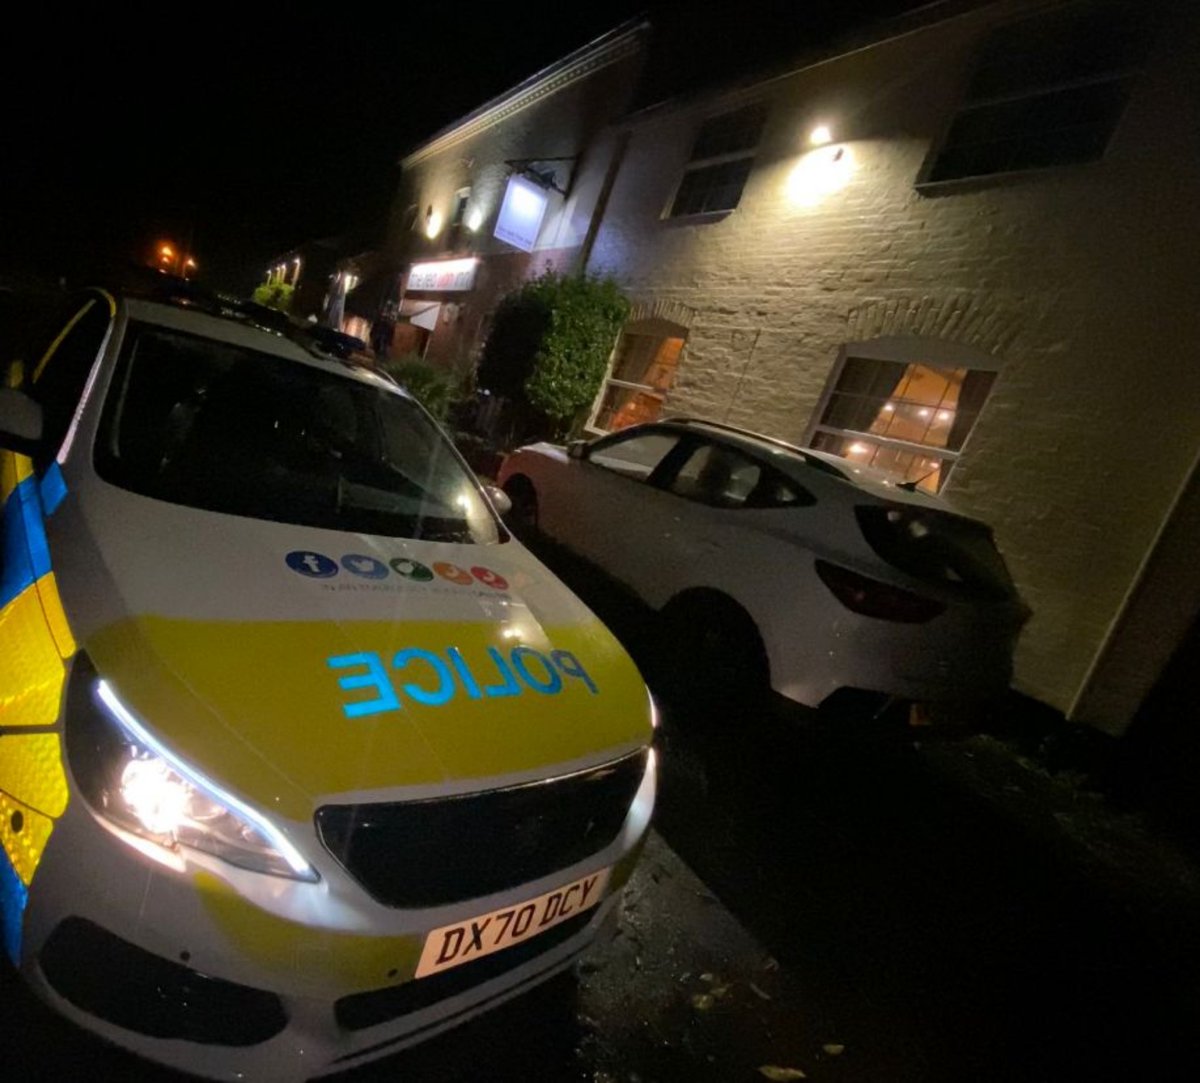 Last night @sstaffspolice S/Sgt was on duty showing a Hi-Vis presence in and around our rural towns and villages.
Showing a policing presence in #Bobbington here as a part of #OpBormus. Prevention before detection! 🚔

#OneTeam #SpecialConstable #SpecialContribution